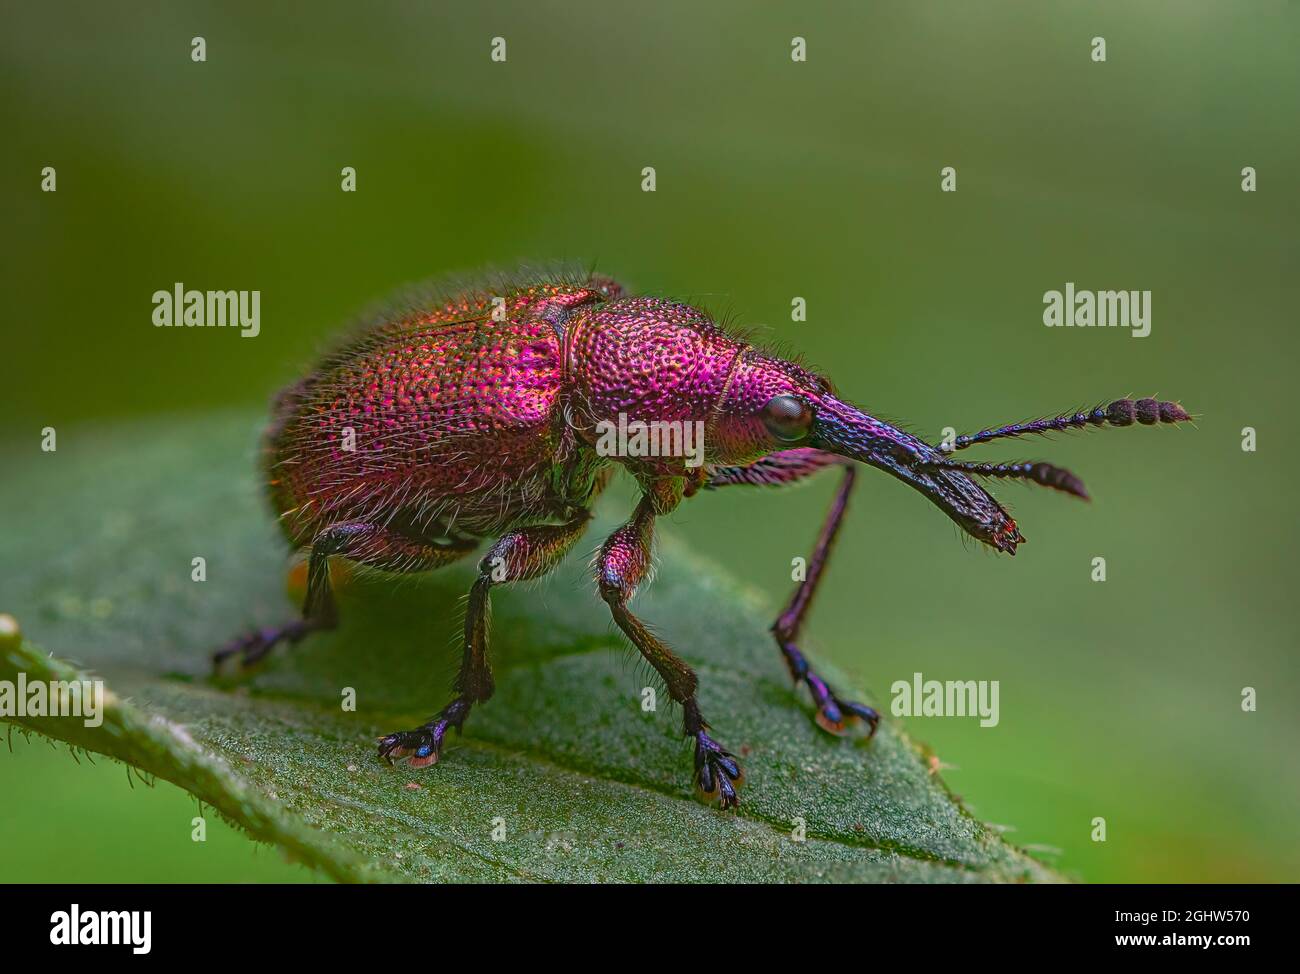 Weevil Beetle Rhynchites bacchus on a green leaf. Pest for fruit trees. a problem for gardeners and farmers Stock Photo